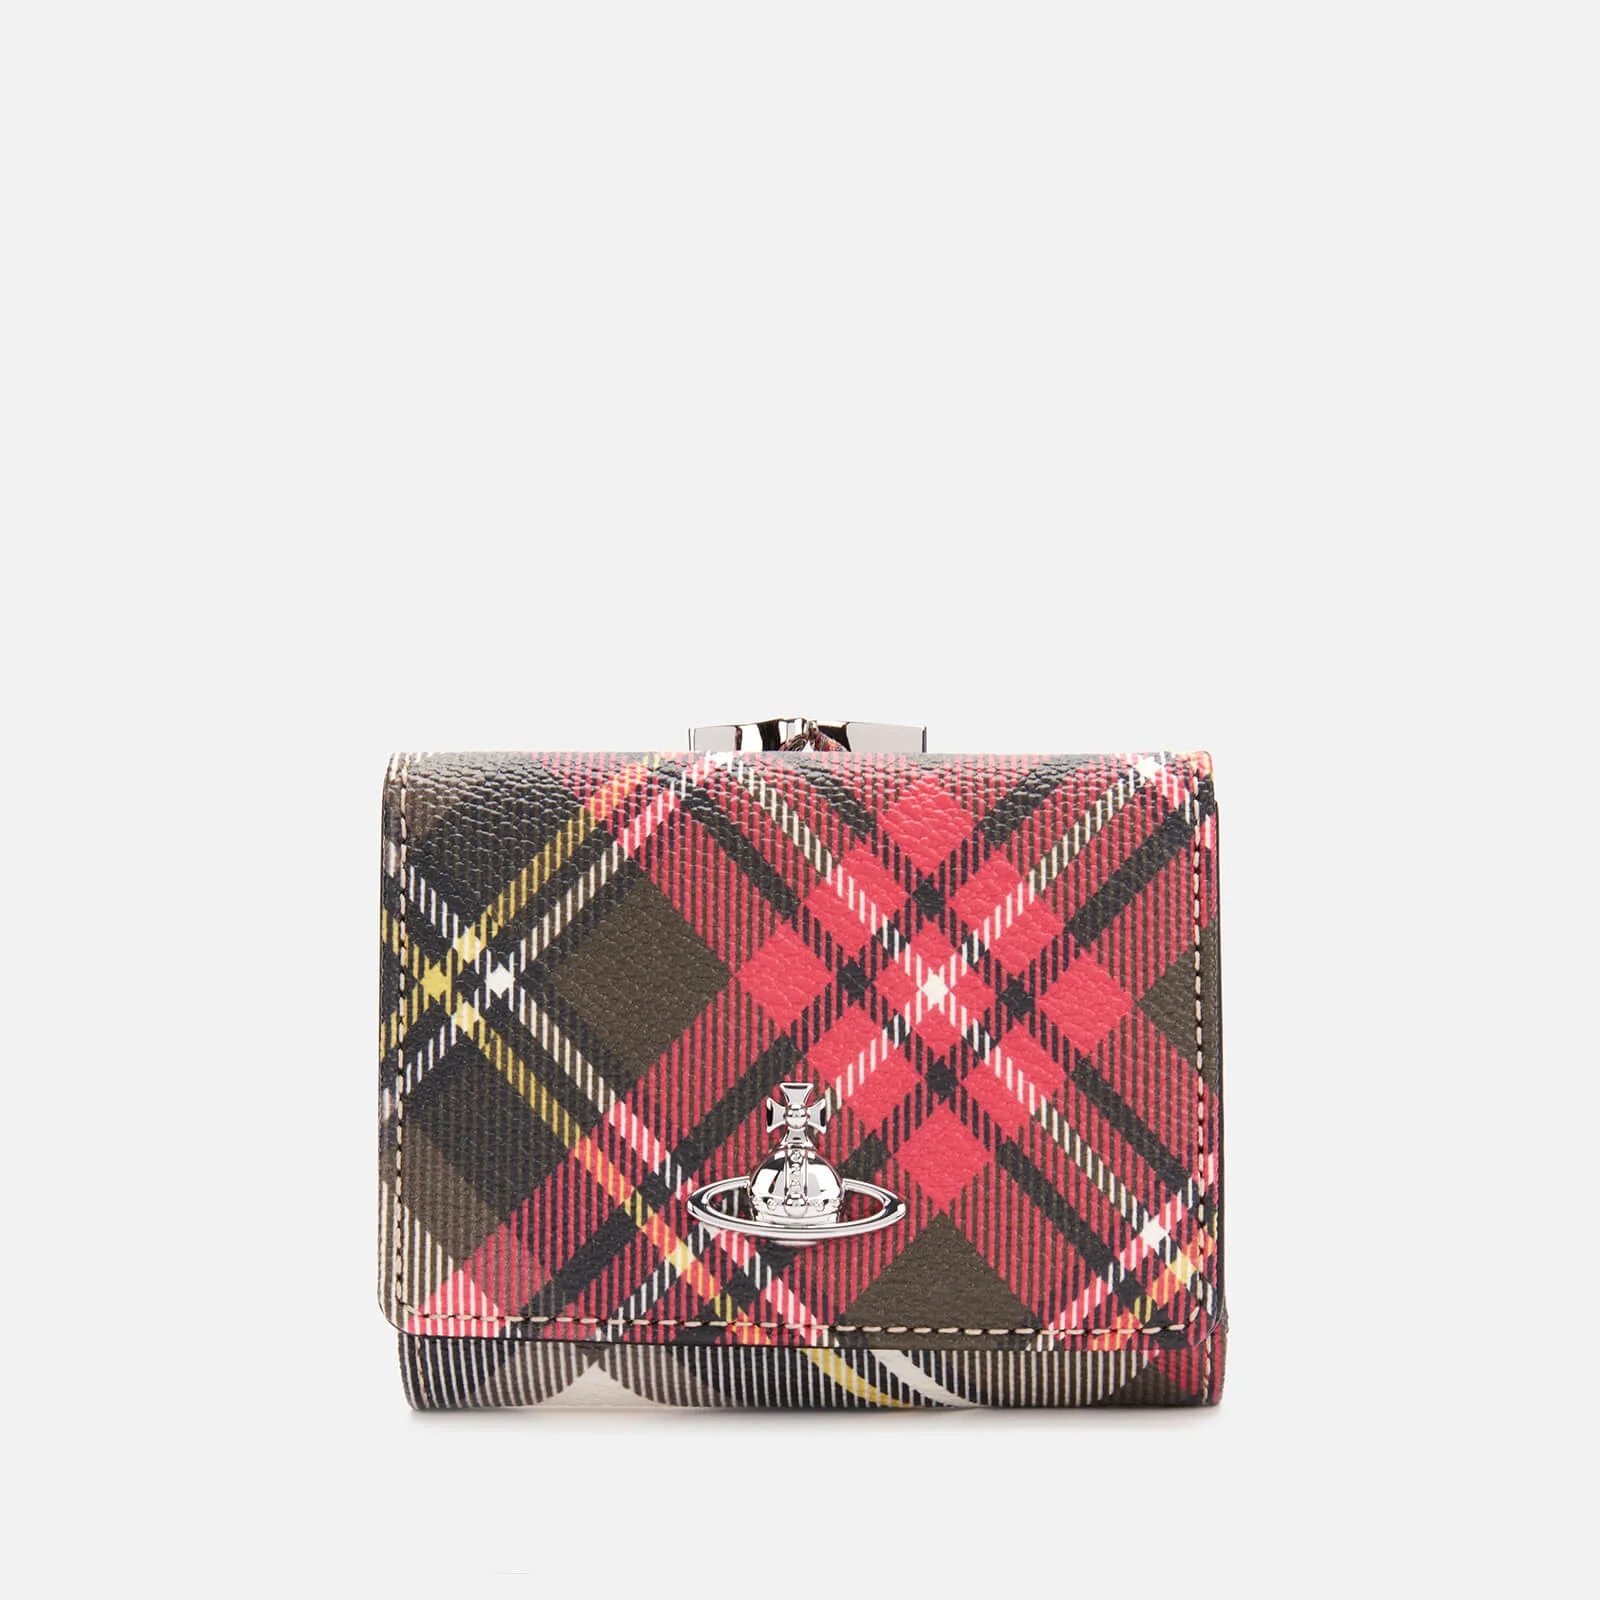 Vivienne Westwood Women's Small Frame Wallet - New Exhibition Image 1